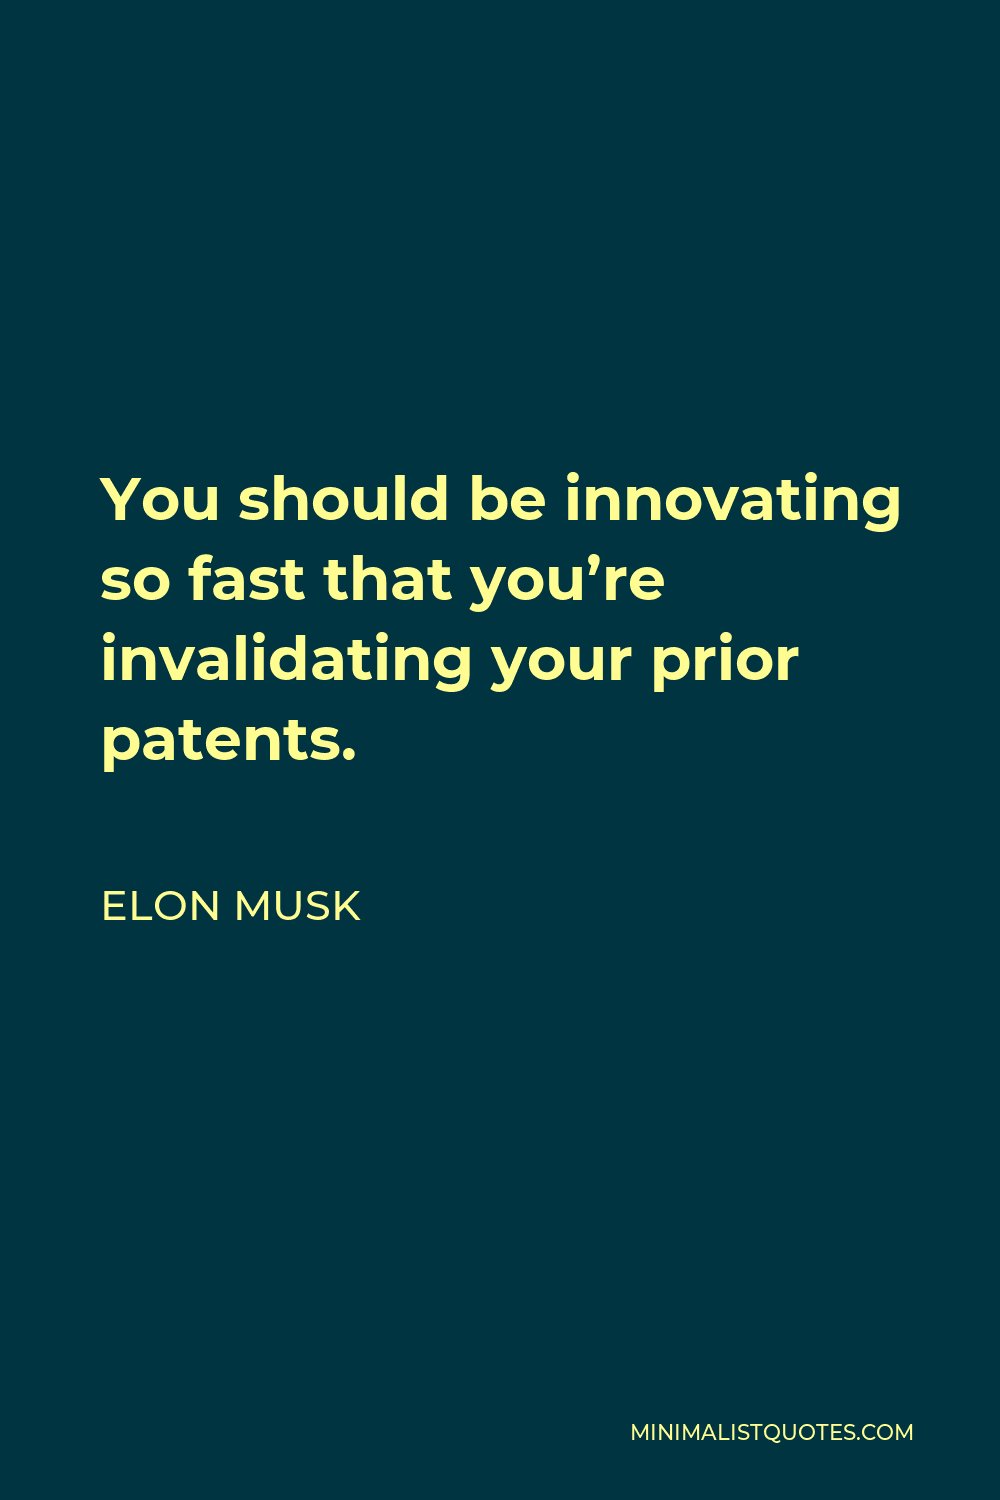 Elon Musk Quote - You should be innovating so fast that you’re invalidating your prior patents.